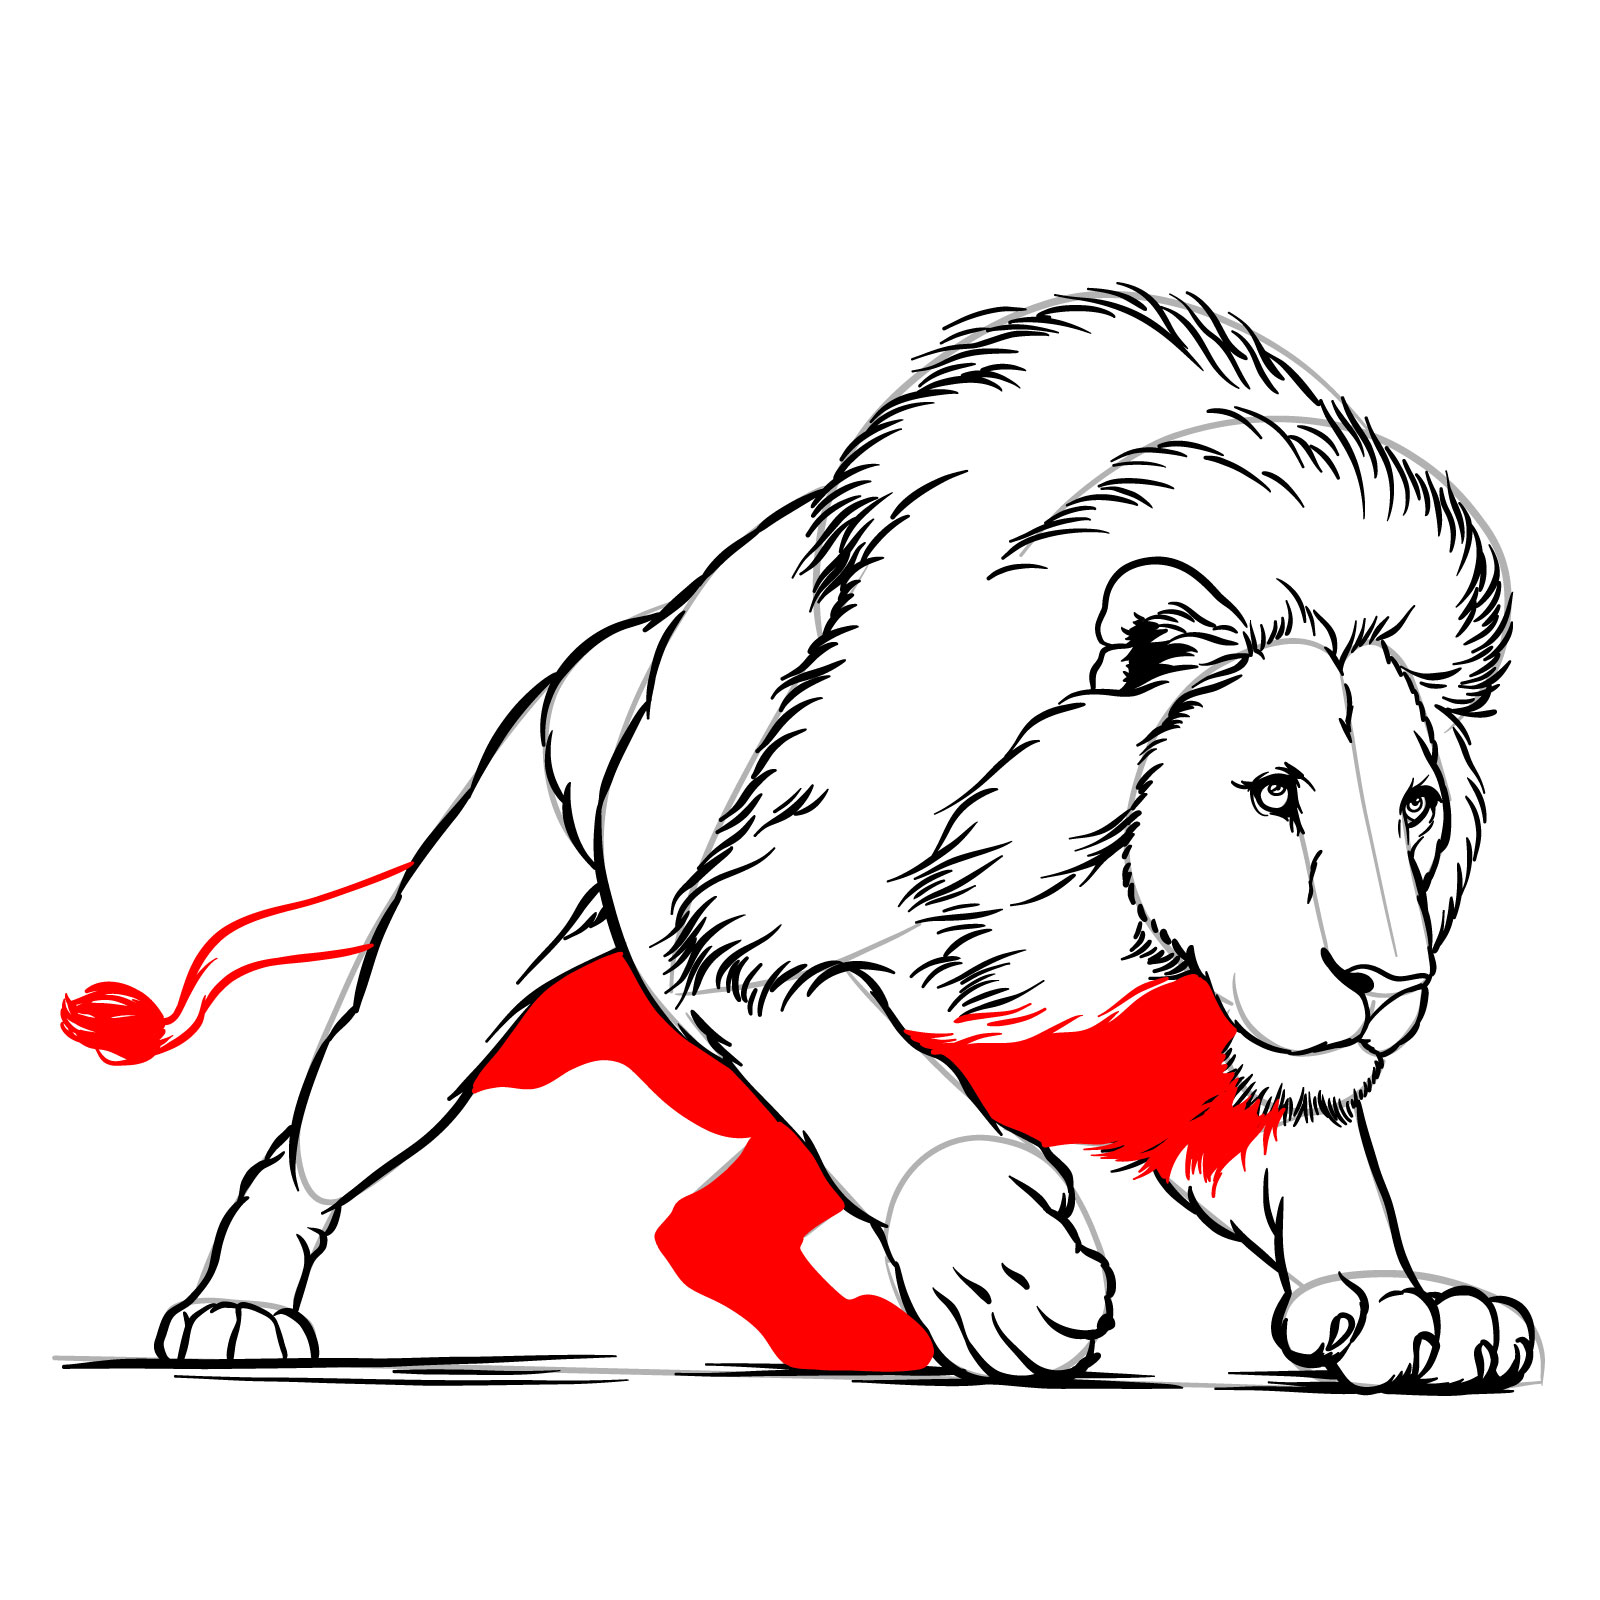 How to draw a hunting lion - Step 17: Second rear leg and shading